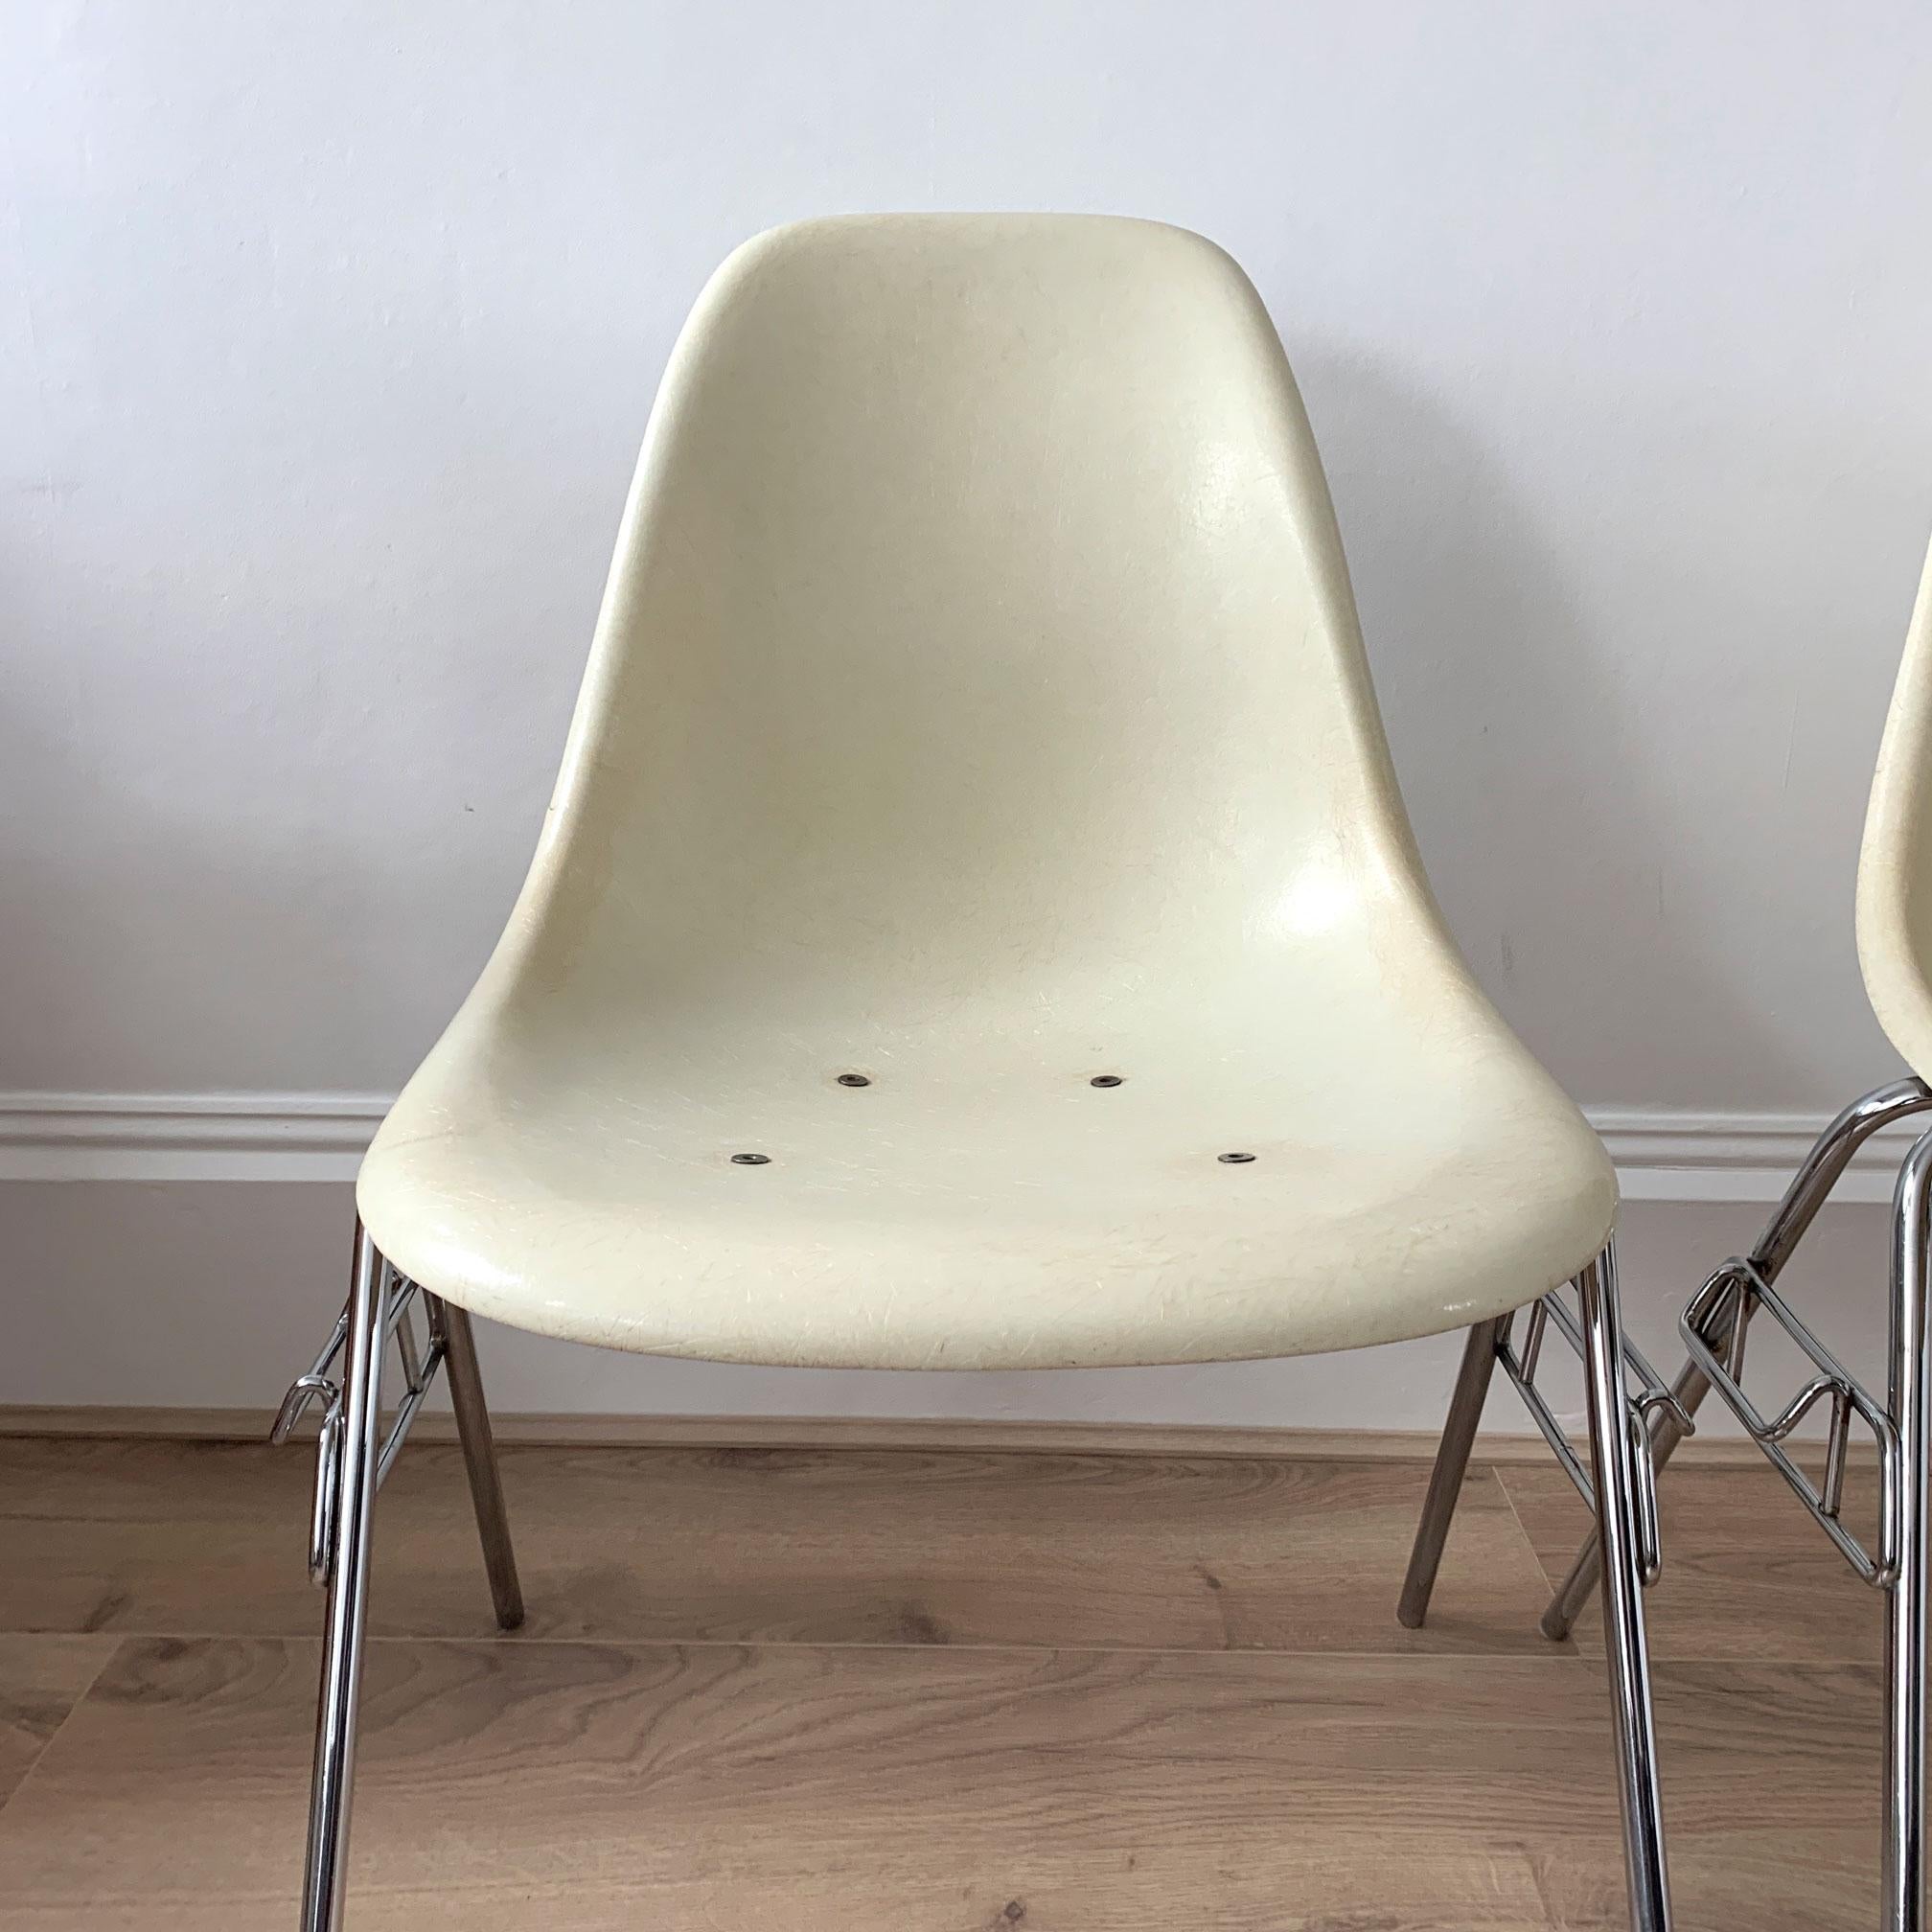 An iconic pair of parchment coloured fibreglass shell chairs on stacking bases, designed by Charles and Ray Eames for Herman Miller.